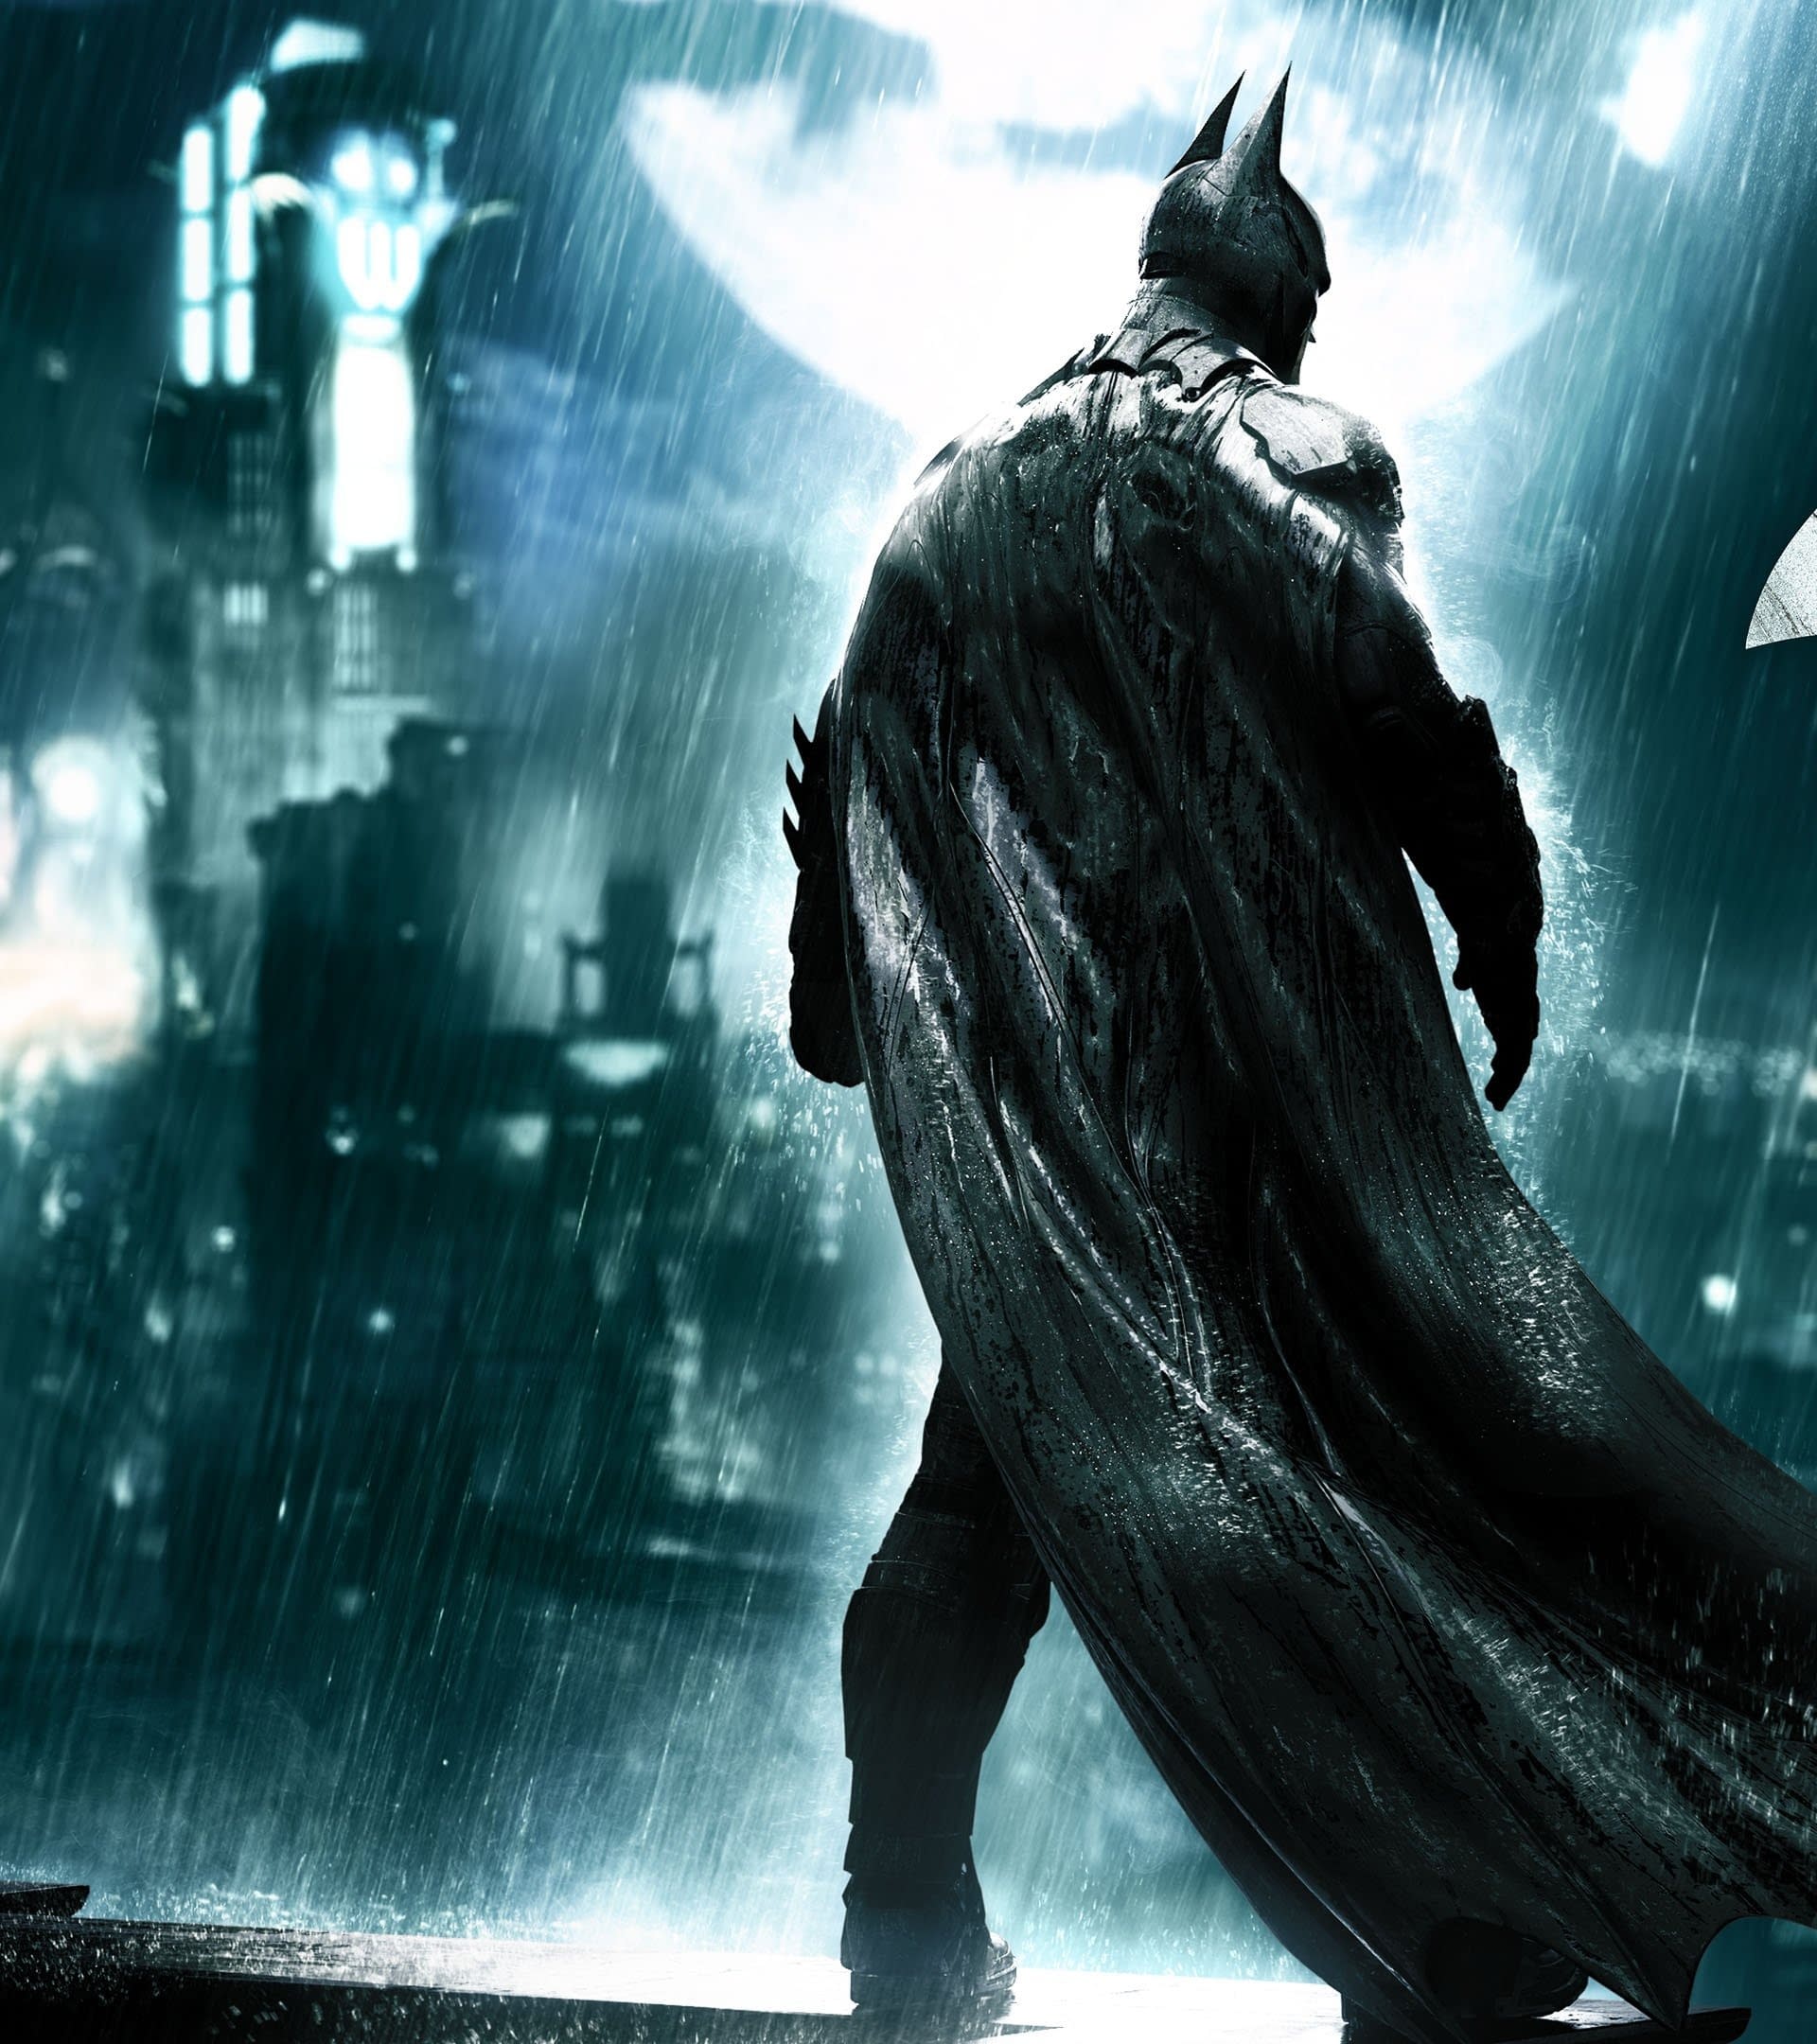 Batman: Arkham was announced for Trilogy Switch Console: Here is the First Video